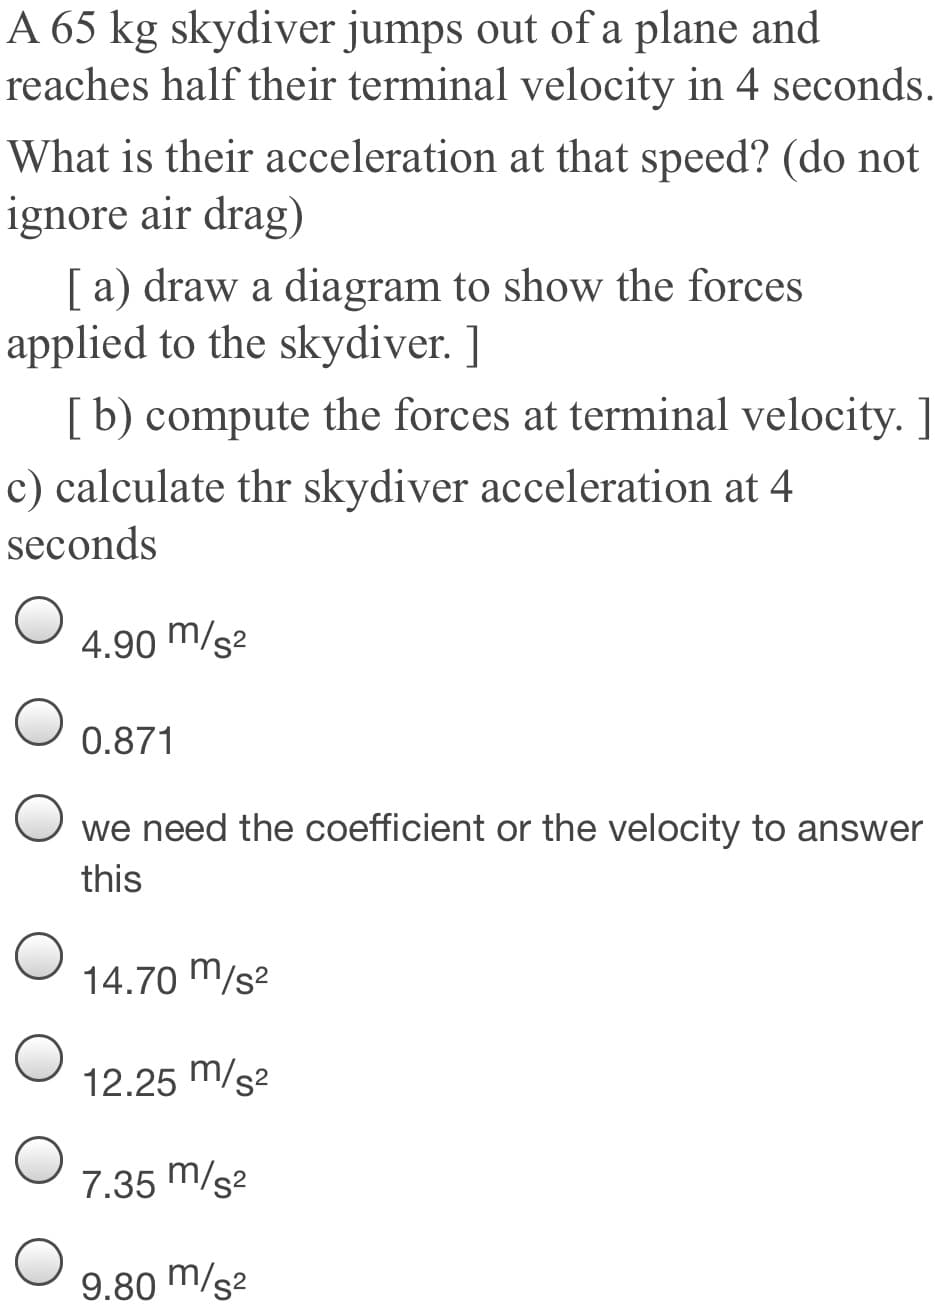 A 65 kg skydiver jumps out of a plane and
reaches half their terminal velocity in 4 seconds.
What is their acceleration at that speed? (do not
ignore air drag)
[ a) draw a diagram to show the forces
applied to the skydiver. ]
[b) compute the forces at terminal velocity. ]
c) calculate thr skydiver acceleration at 4
seconds
4.90 m/s2
0.871
we need the coefficient or the velocity to answer
this
14.70 m/s²
12.25 m/s2
7.35 m/s2
9.80 m/s2
